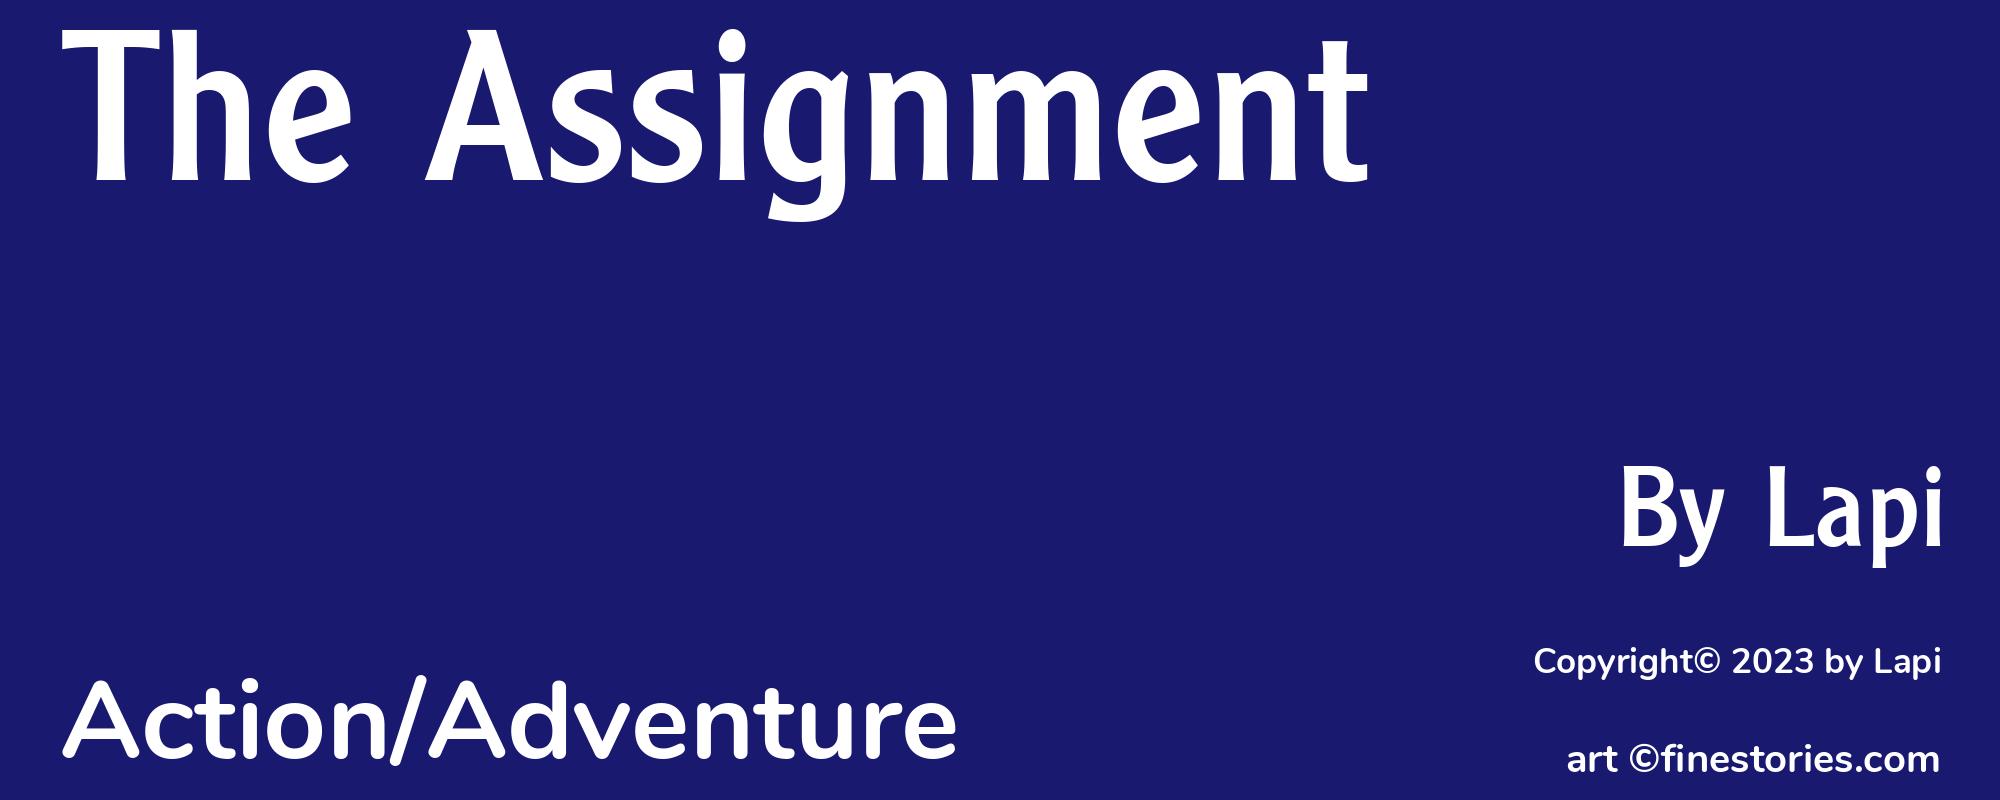 The Assignment - Cover